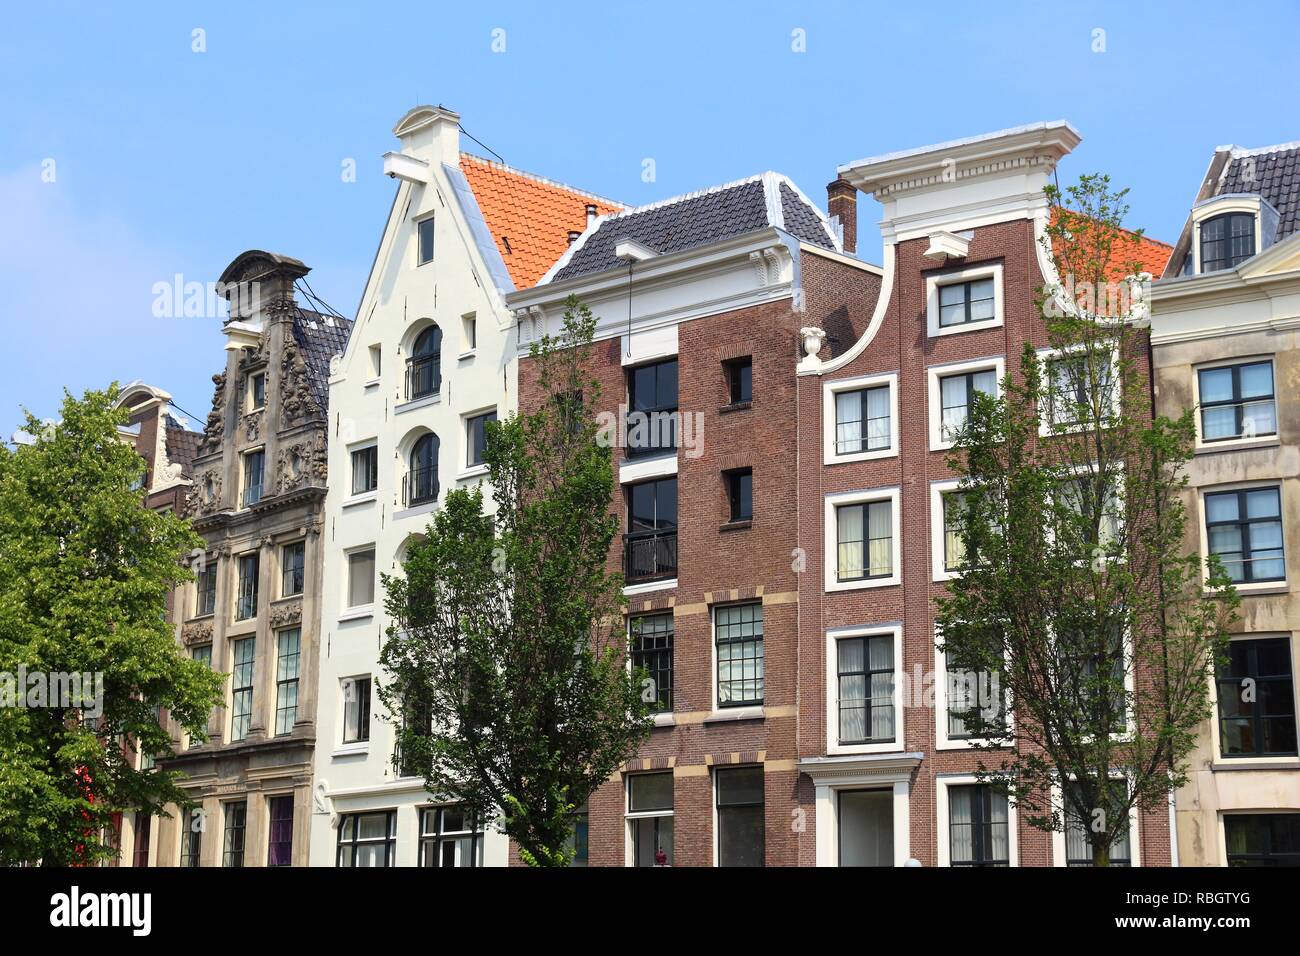 Amsterdam city architecture - Keizersgracht residential buildings. Netherlands rowhouse. Stock Photo